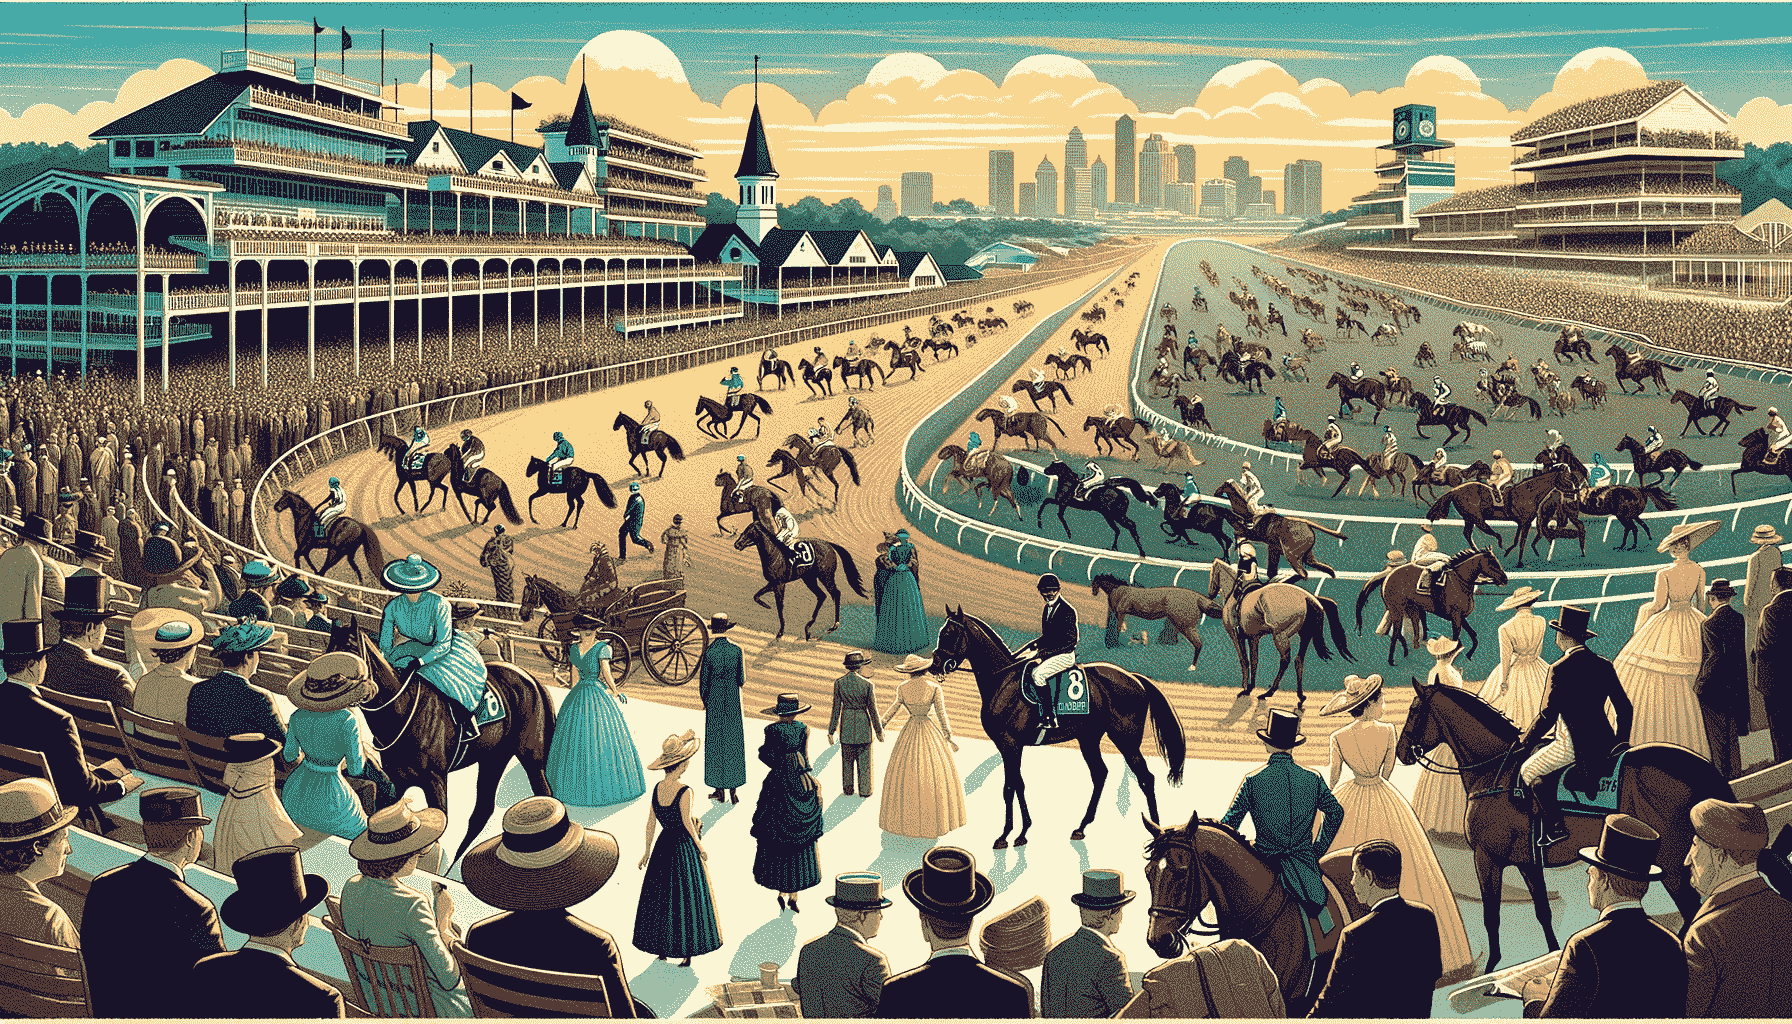 Kentucky Derby History: 20 Facts About the Legendary Event